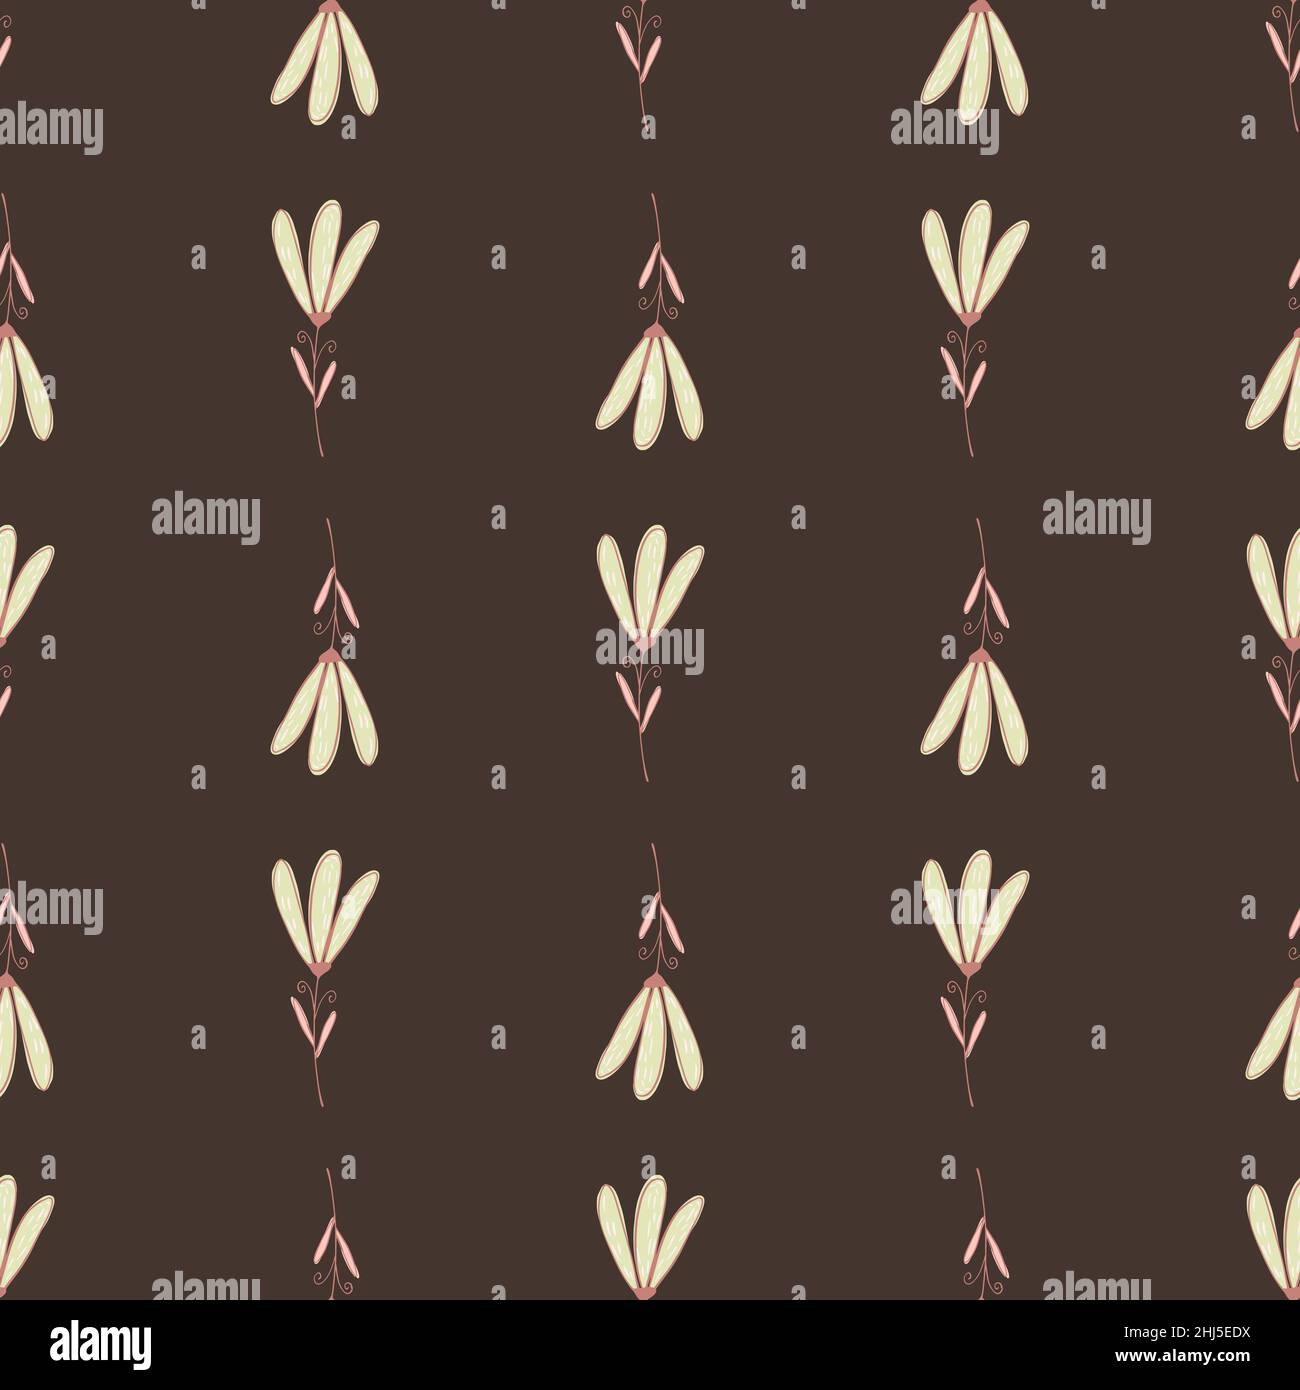 Abstract botanic seamless pattern with flower silhouette ornament. Brown background. Flat vector print for textile, fabric, giftwrap, wallpapers. Endl Stock Vector